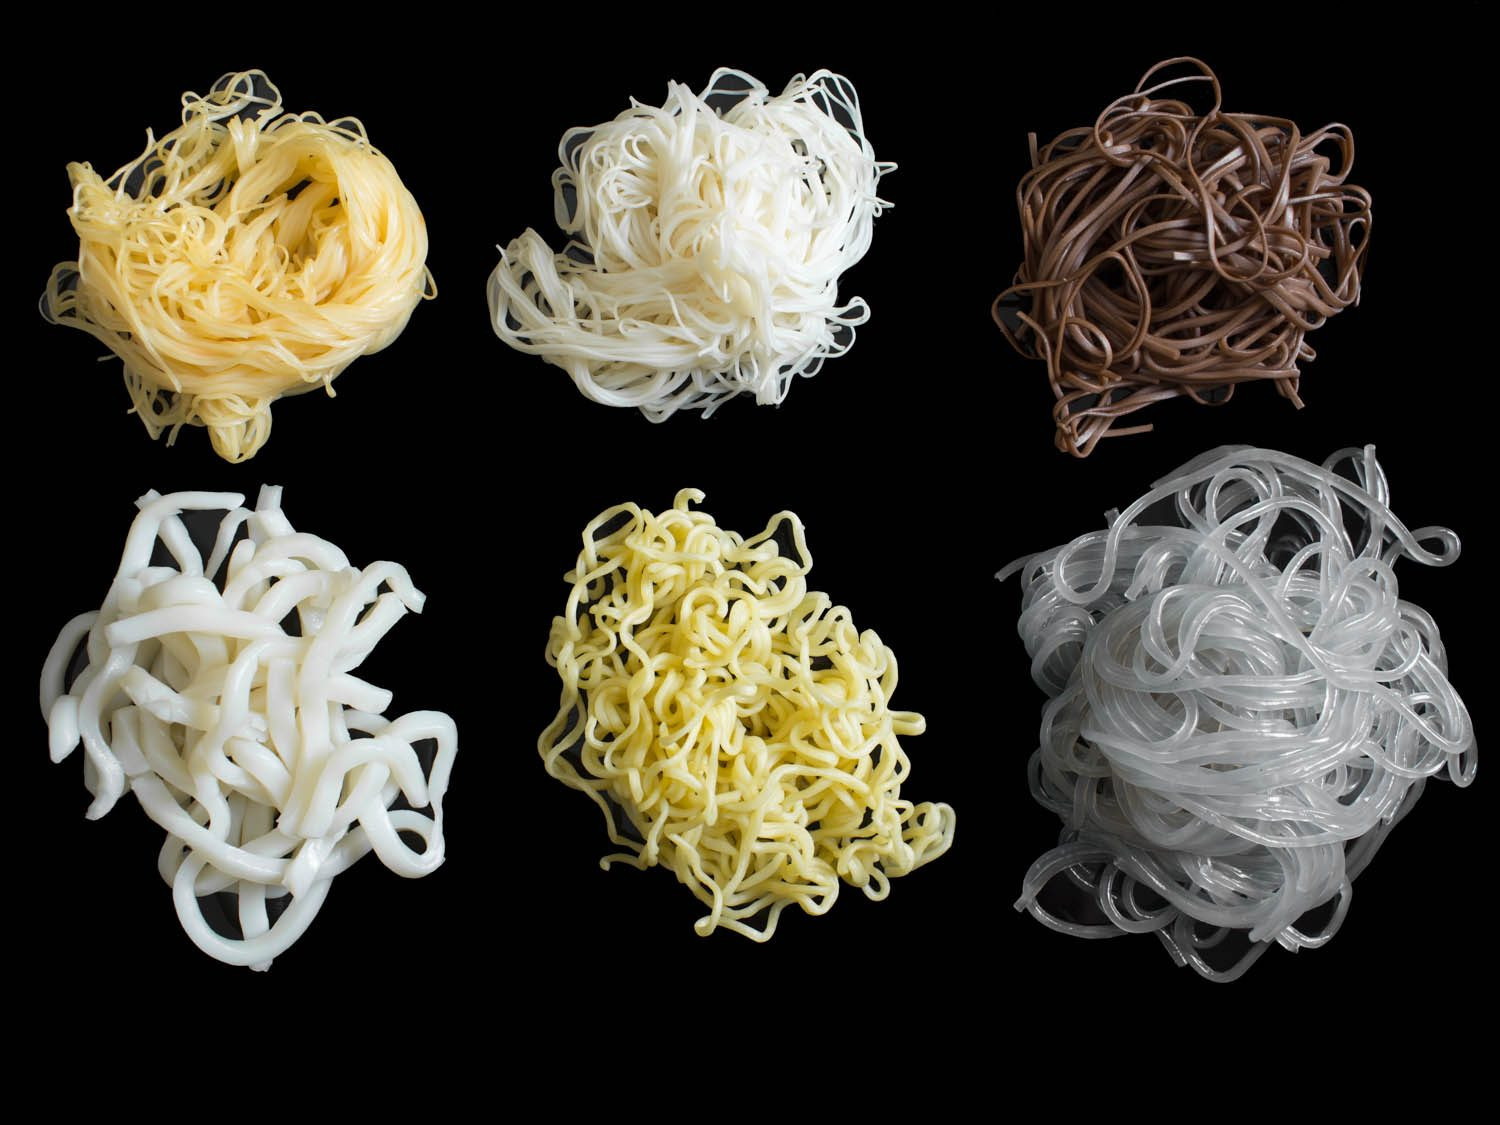 Asian Noodles Types
 The Serious Eats Guide to Shopping for Asian Noodles